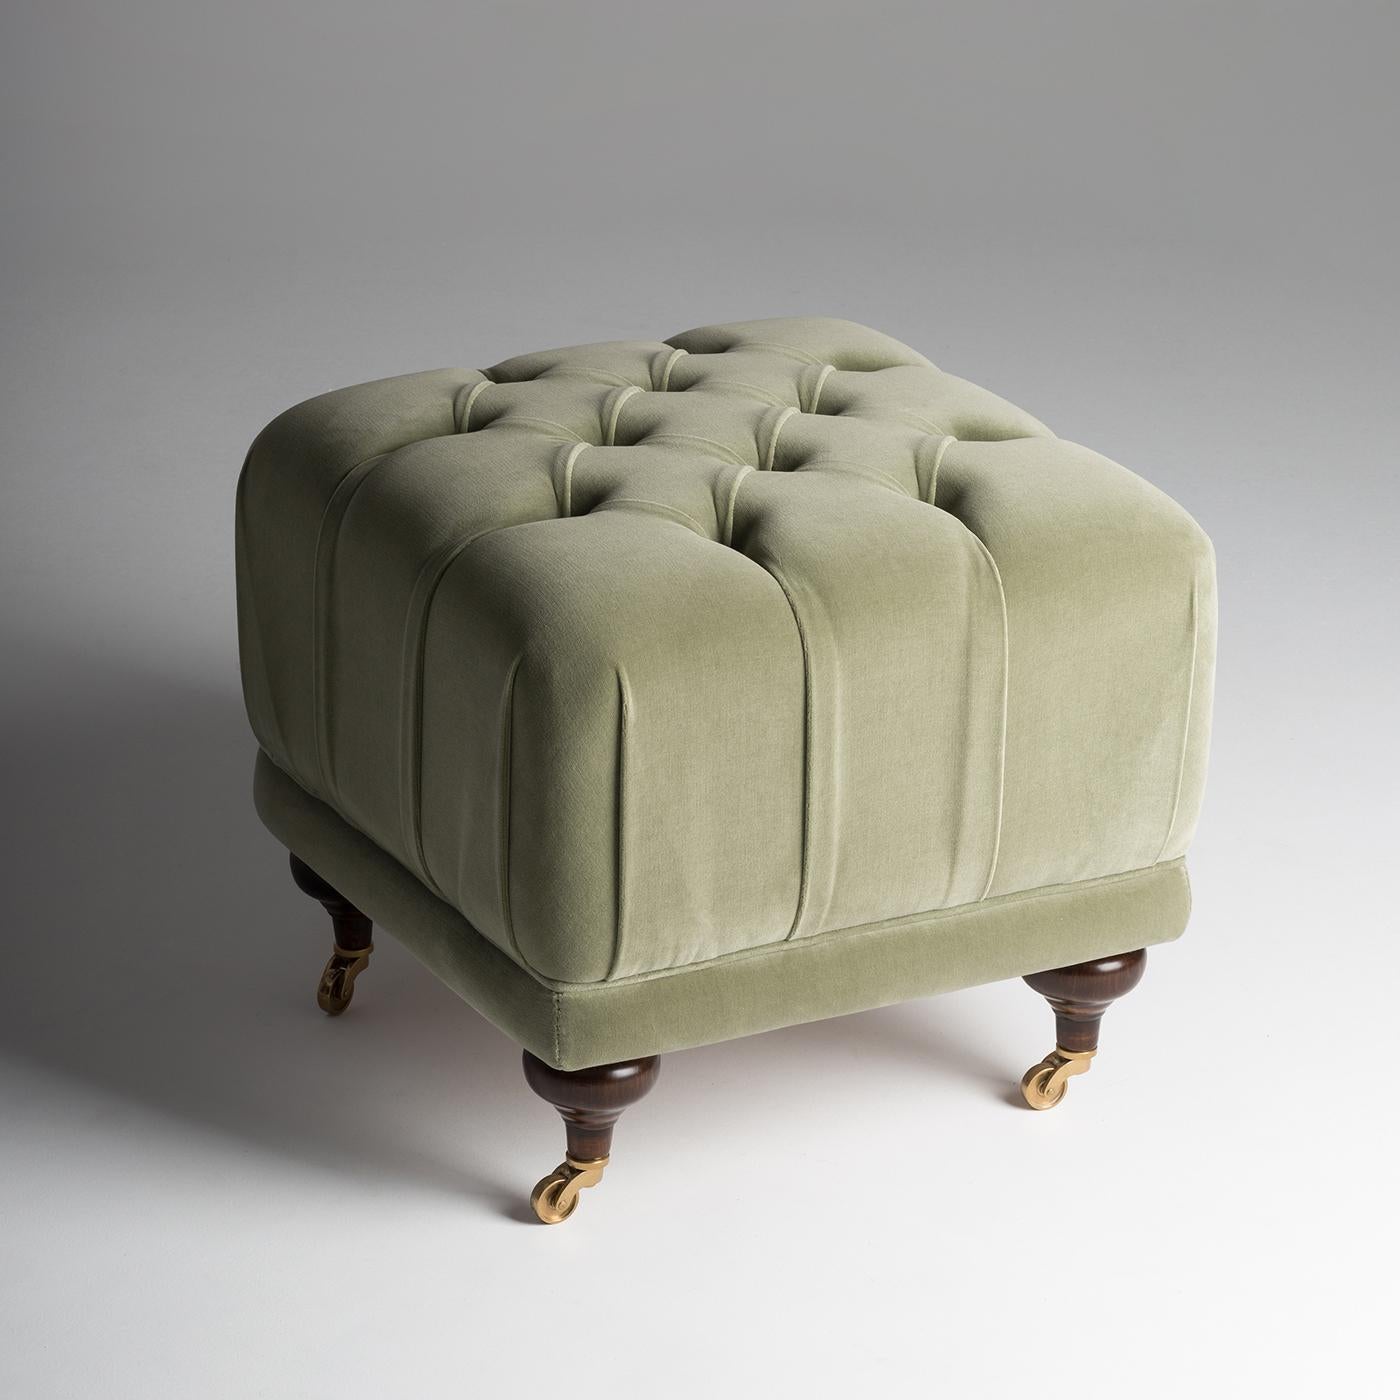 Nicola Mantellassi has designed the Ottoman to complete the Couture sofa collection, giving a comfortable seat in a special event. All versions of this Ottoman have a covered base that emphasizes the proportions between the volumes. This creates a